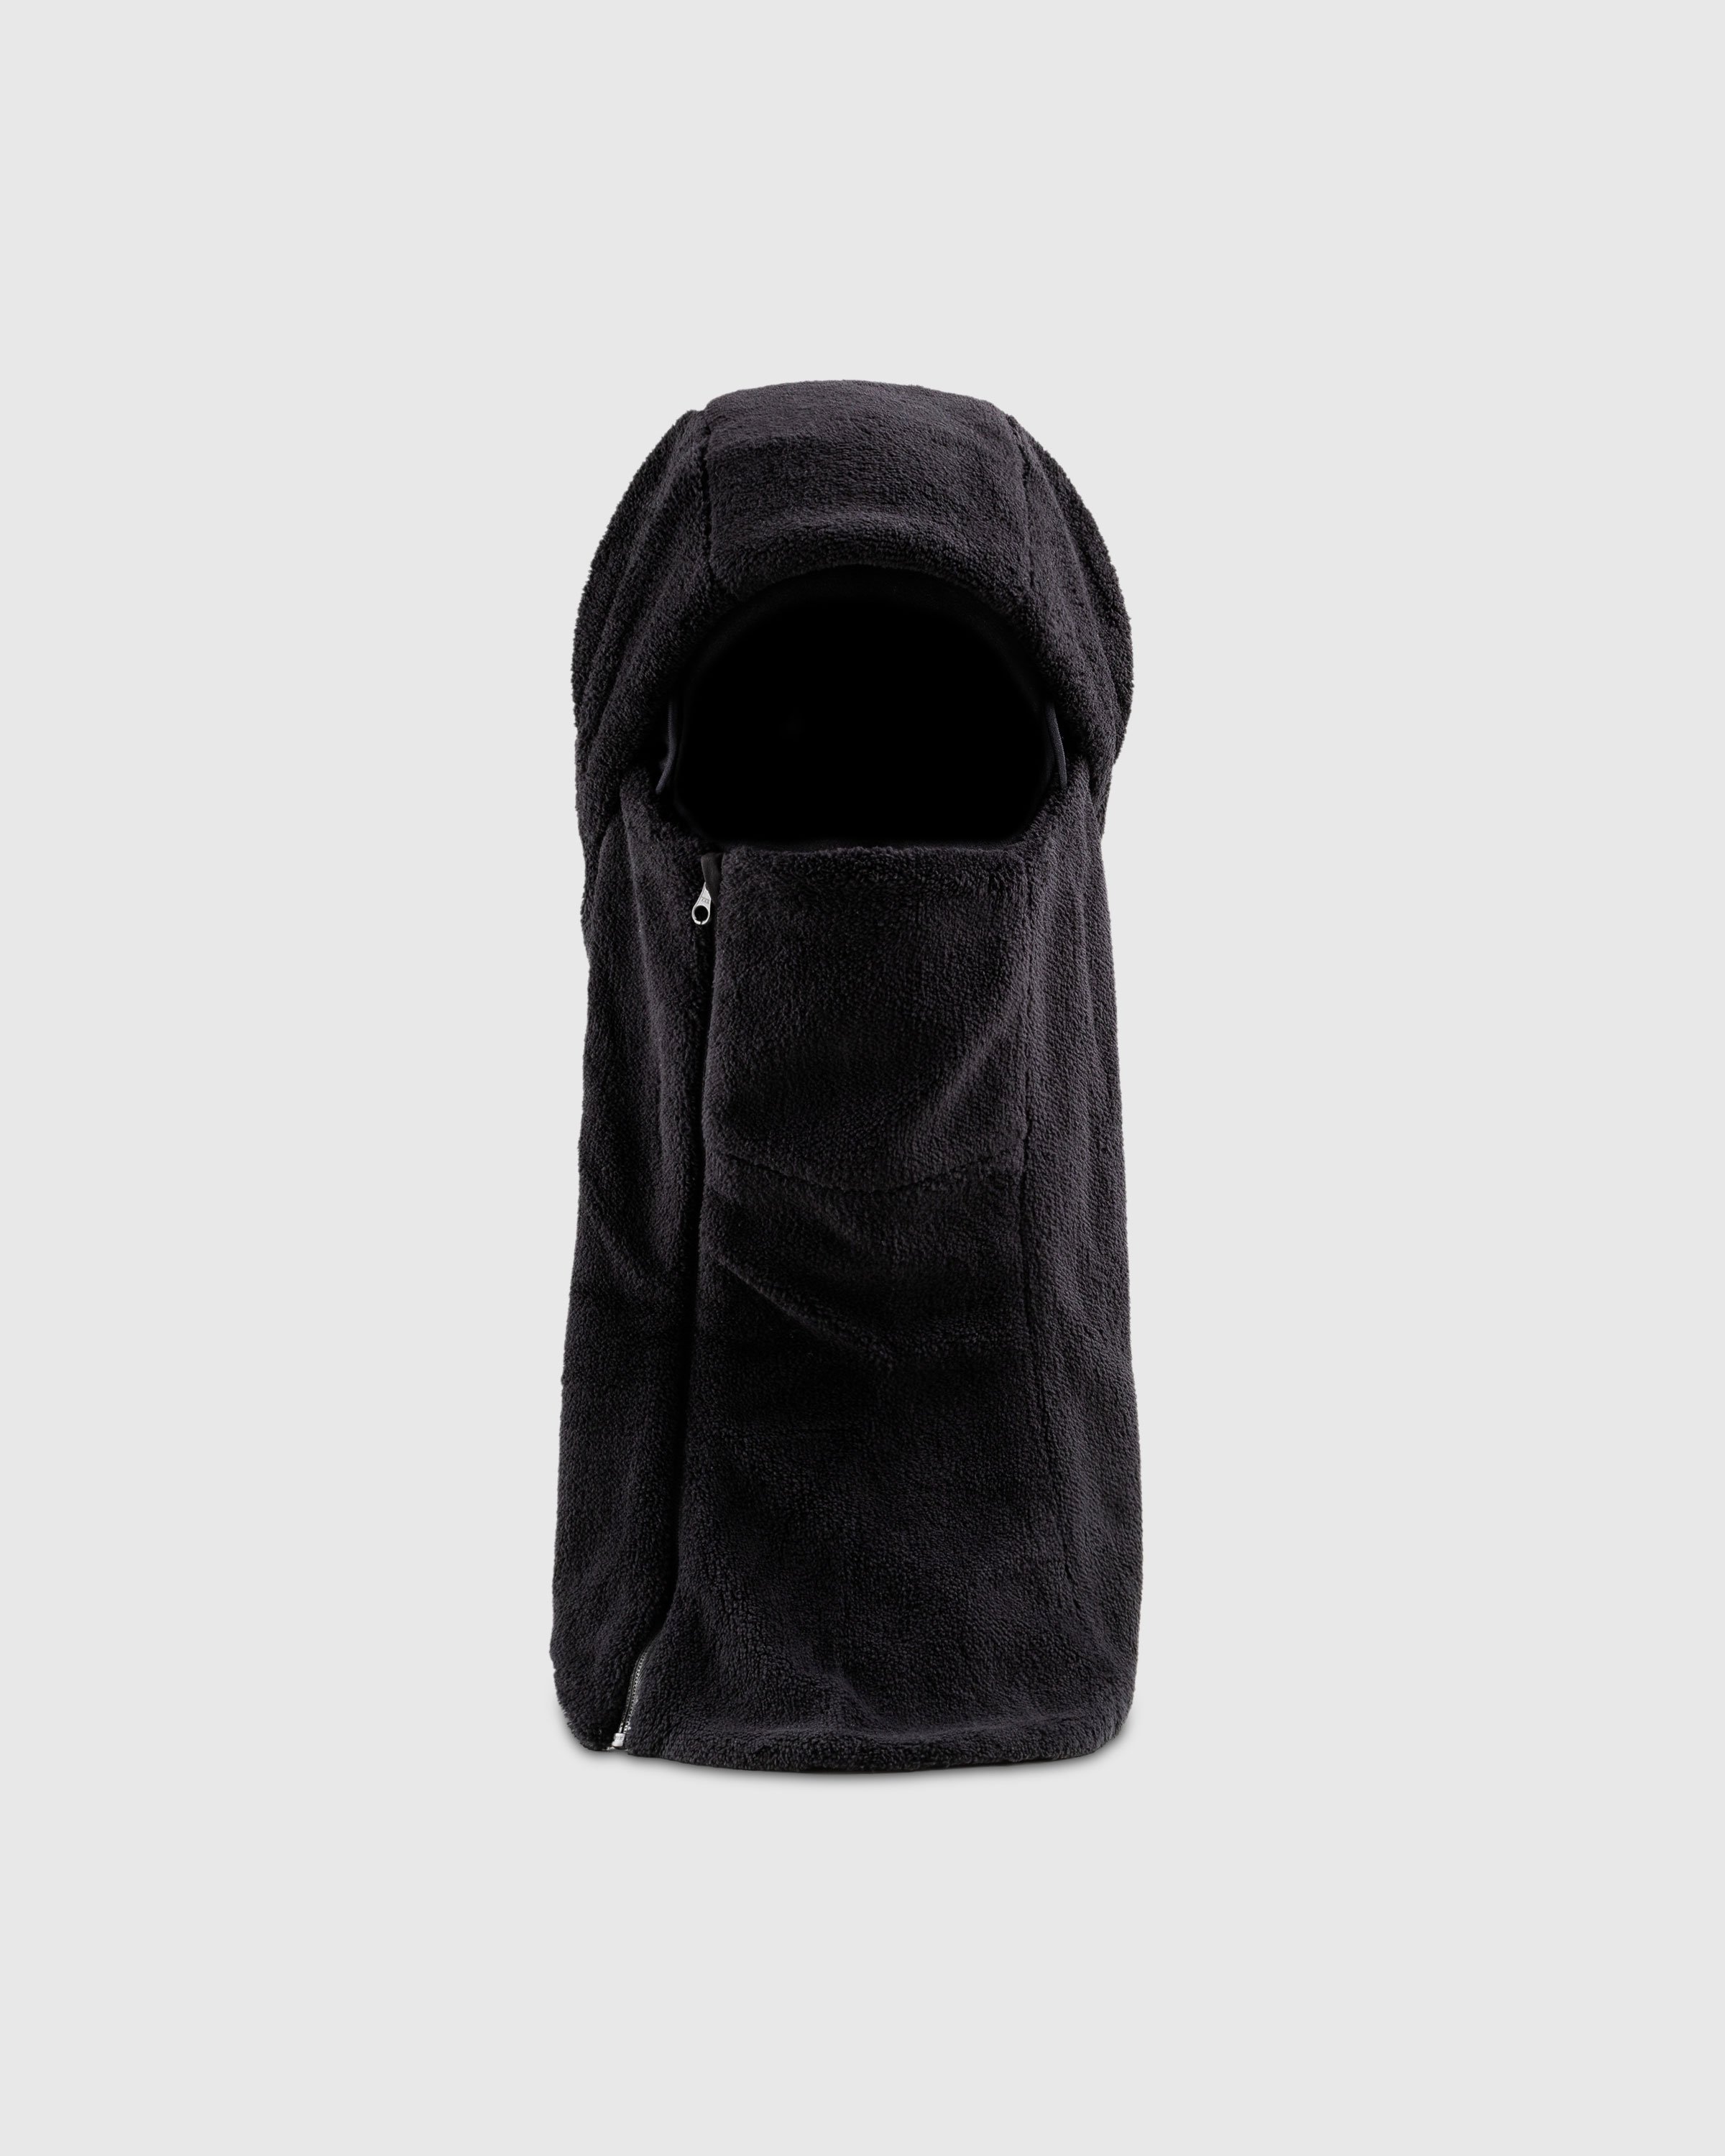 Post Archive Faction (PAF) - 5.1 BALACLAVA RIGHT - Accessories - Black - Image 2